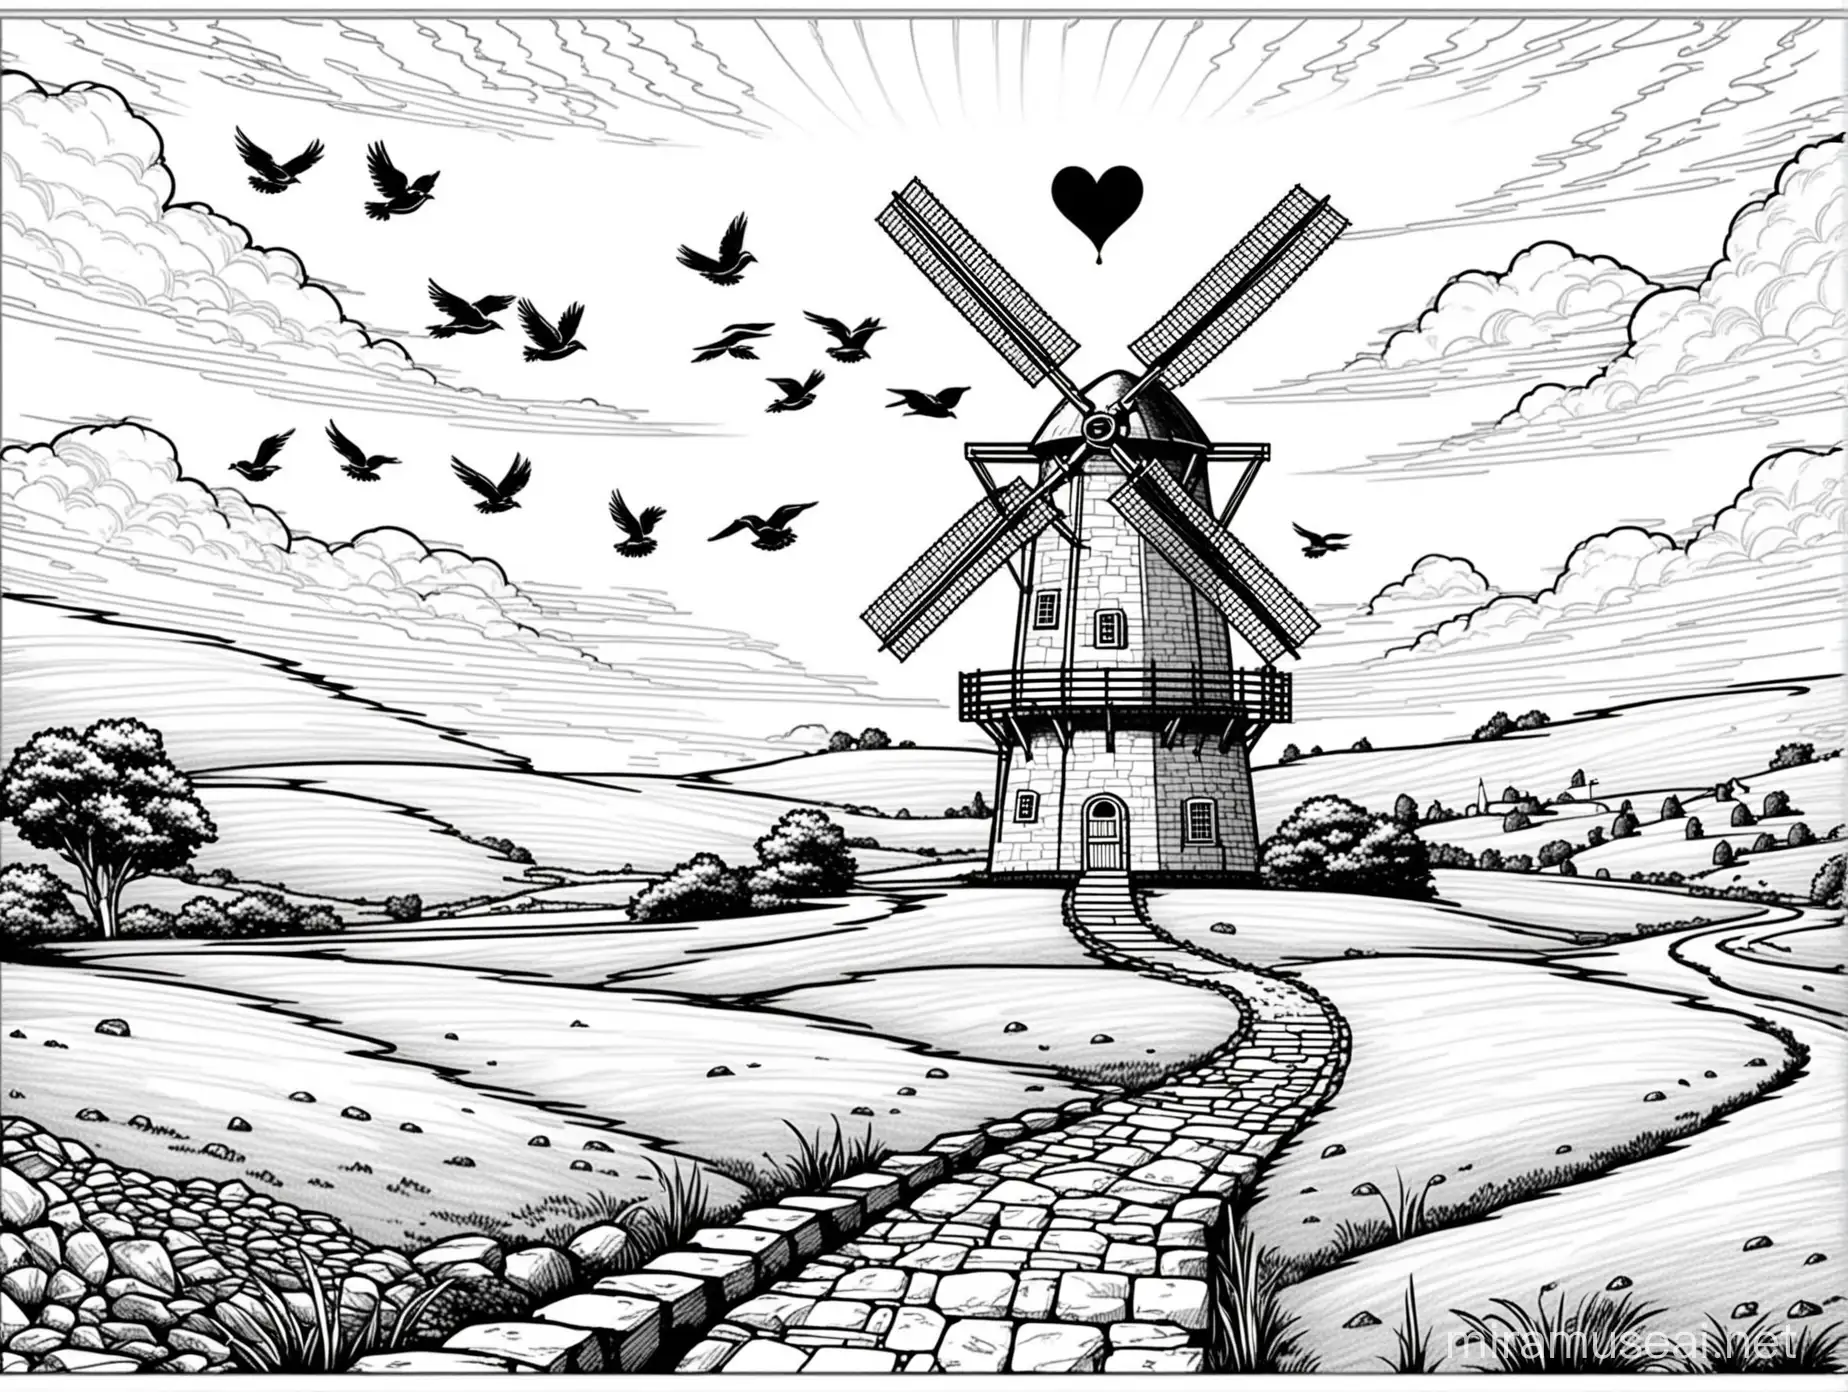 Dutch Countryside Windmill with HeartShaped Door